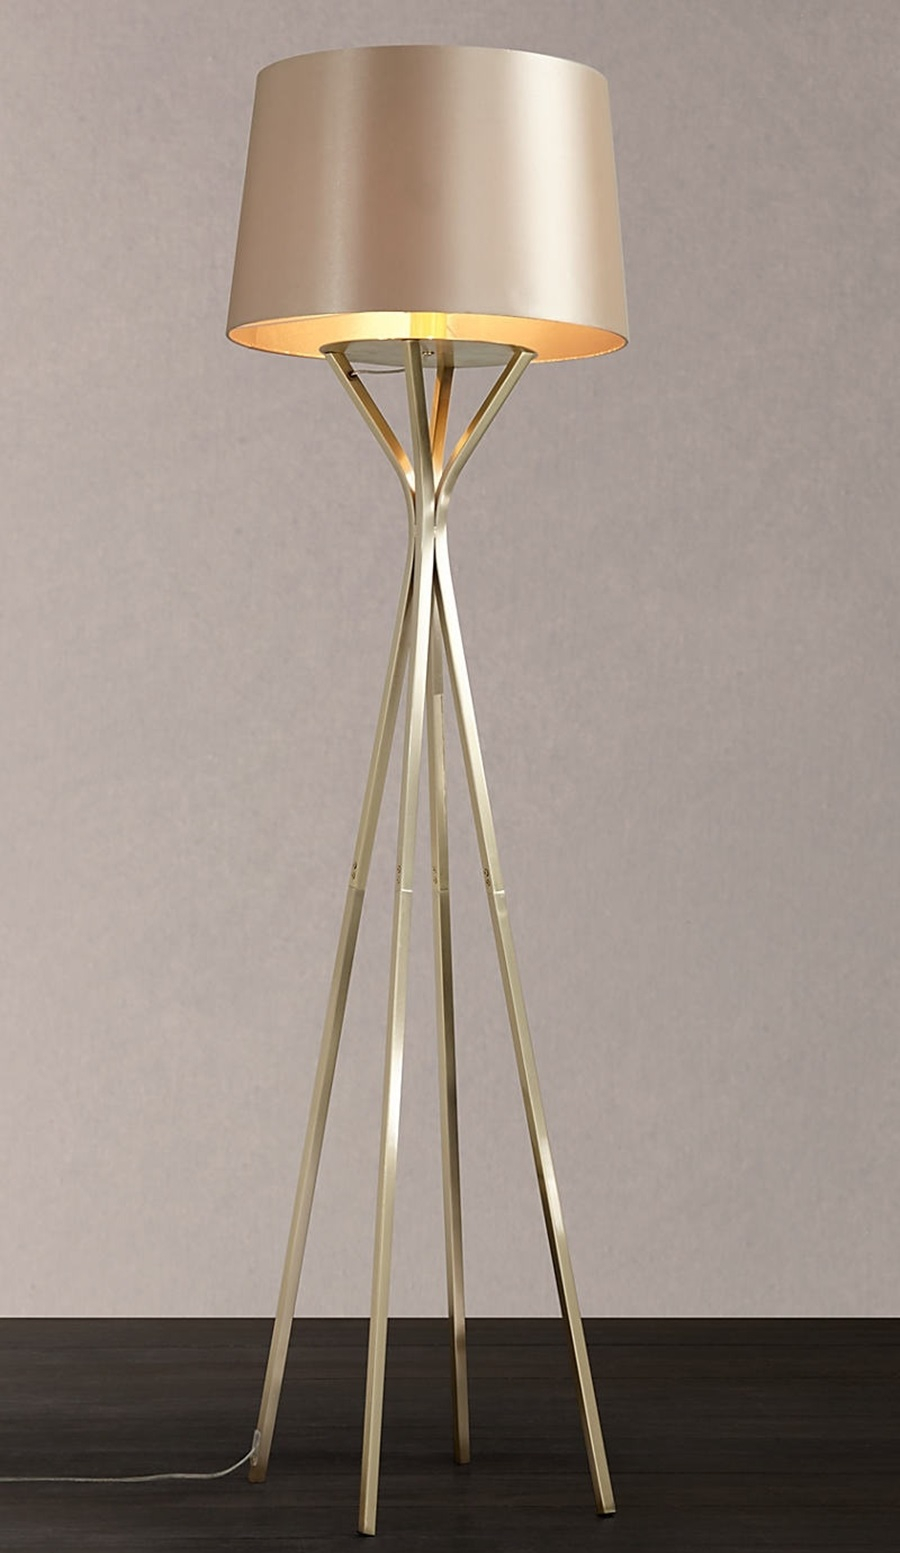 Tripod Gold Floor Lamp Disacode Home Design From Gold regarding sizing 900 X 1553